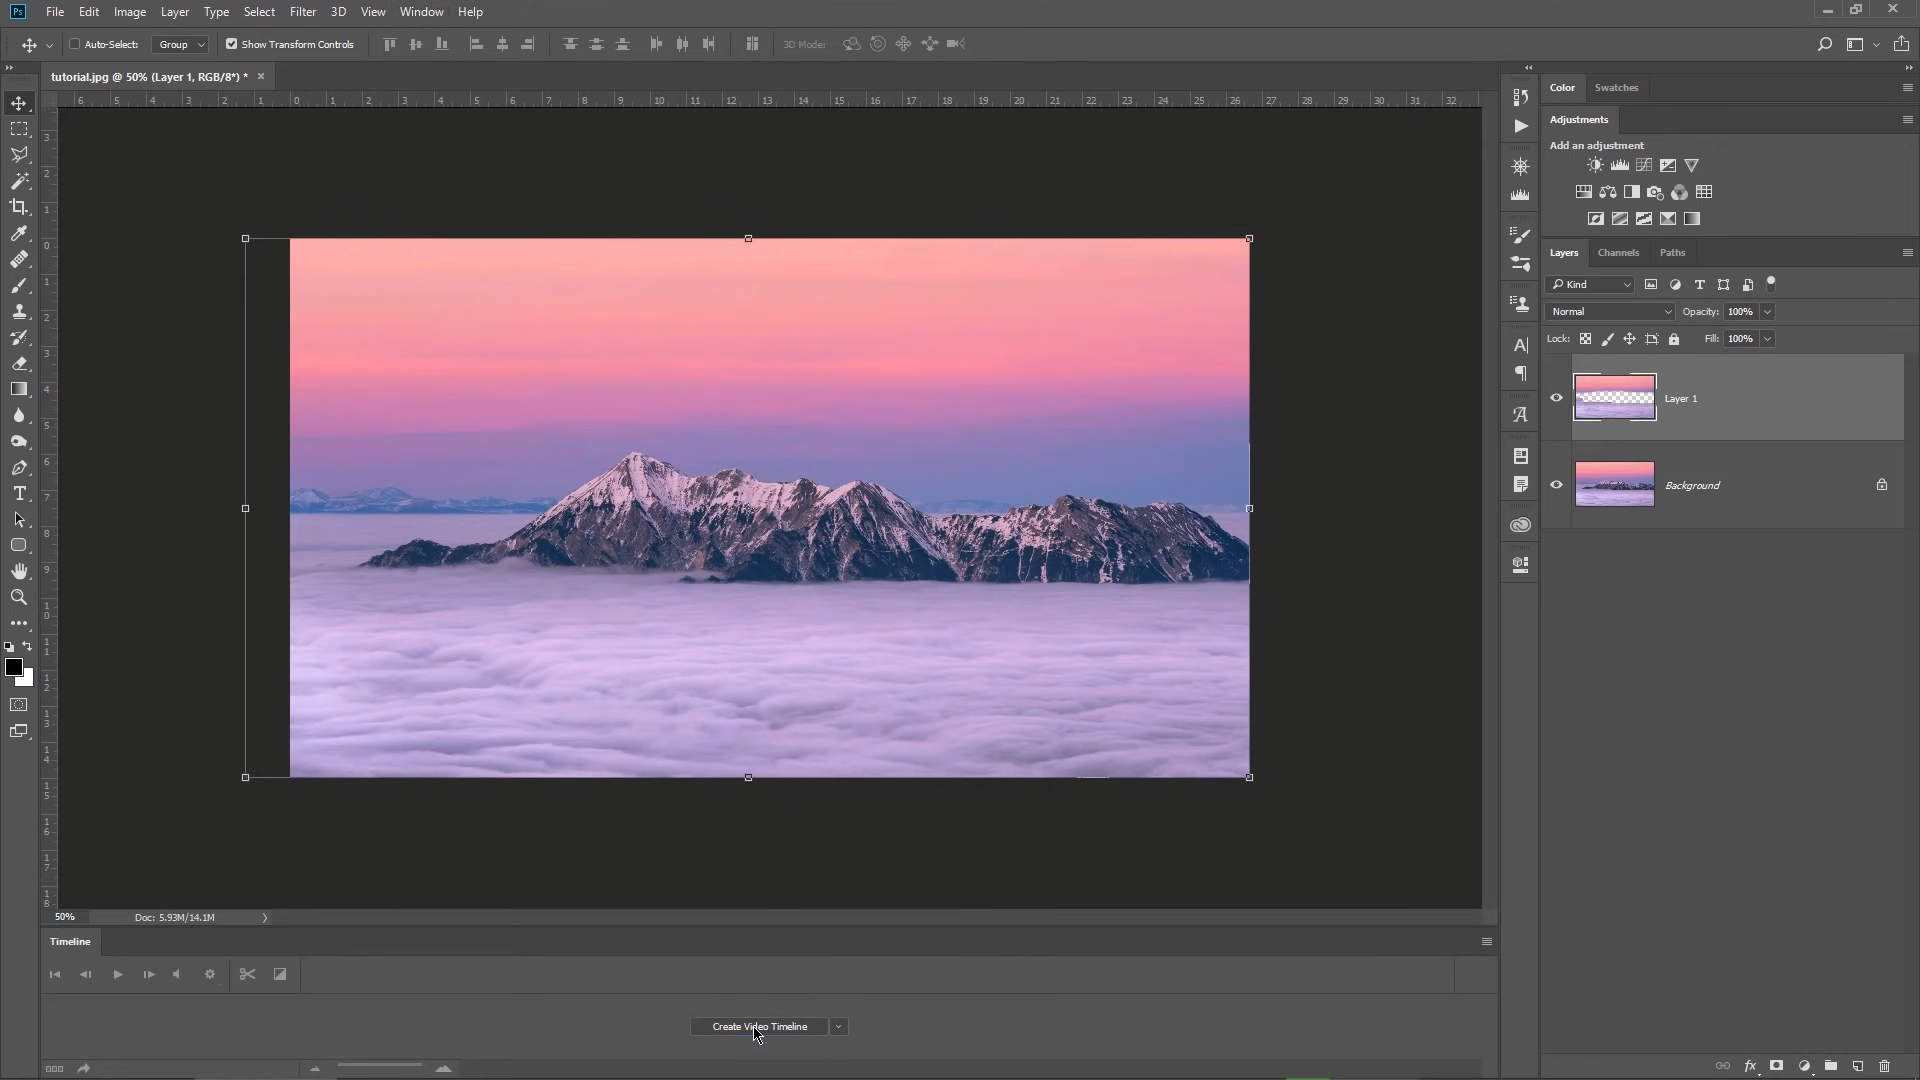 Creating The Animation By Moving The Picture In Adobe Photoshop